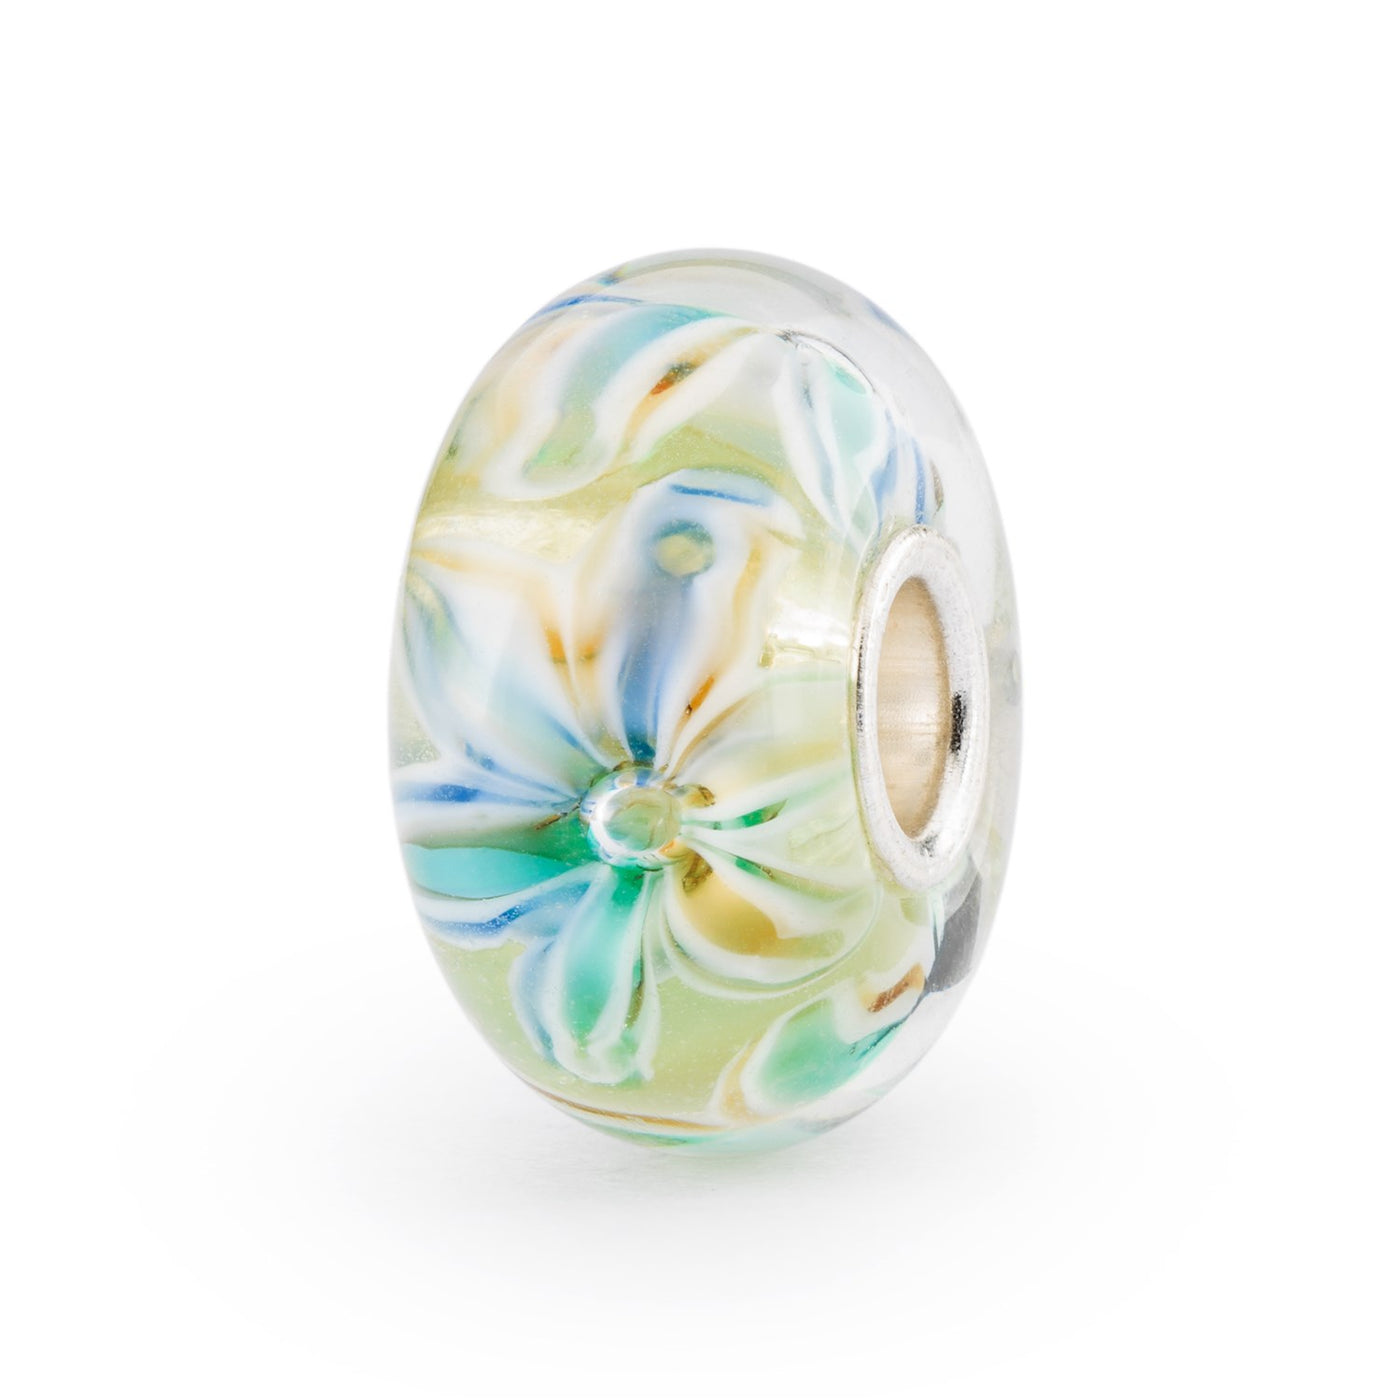 Stunning glass bead featuring a whimsical flower design in green, blue, turquoise and yellow colors. 